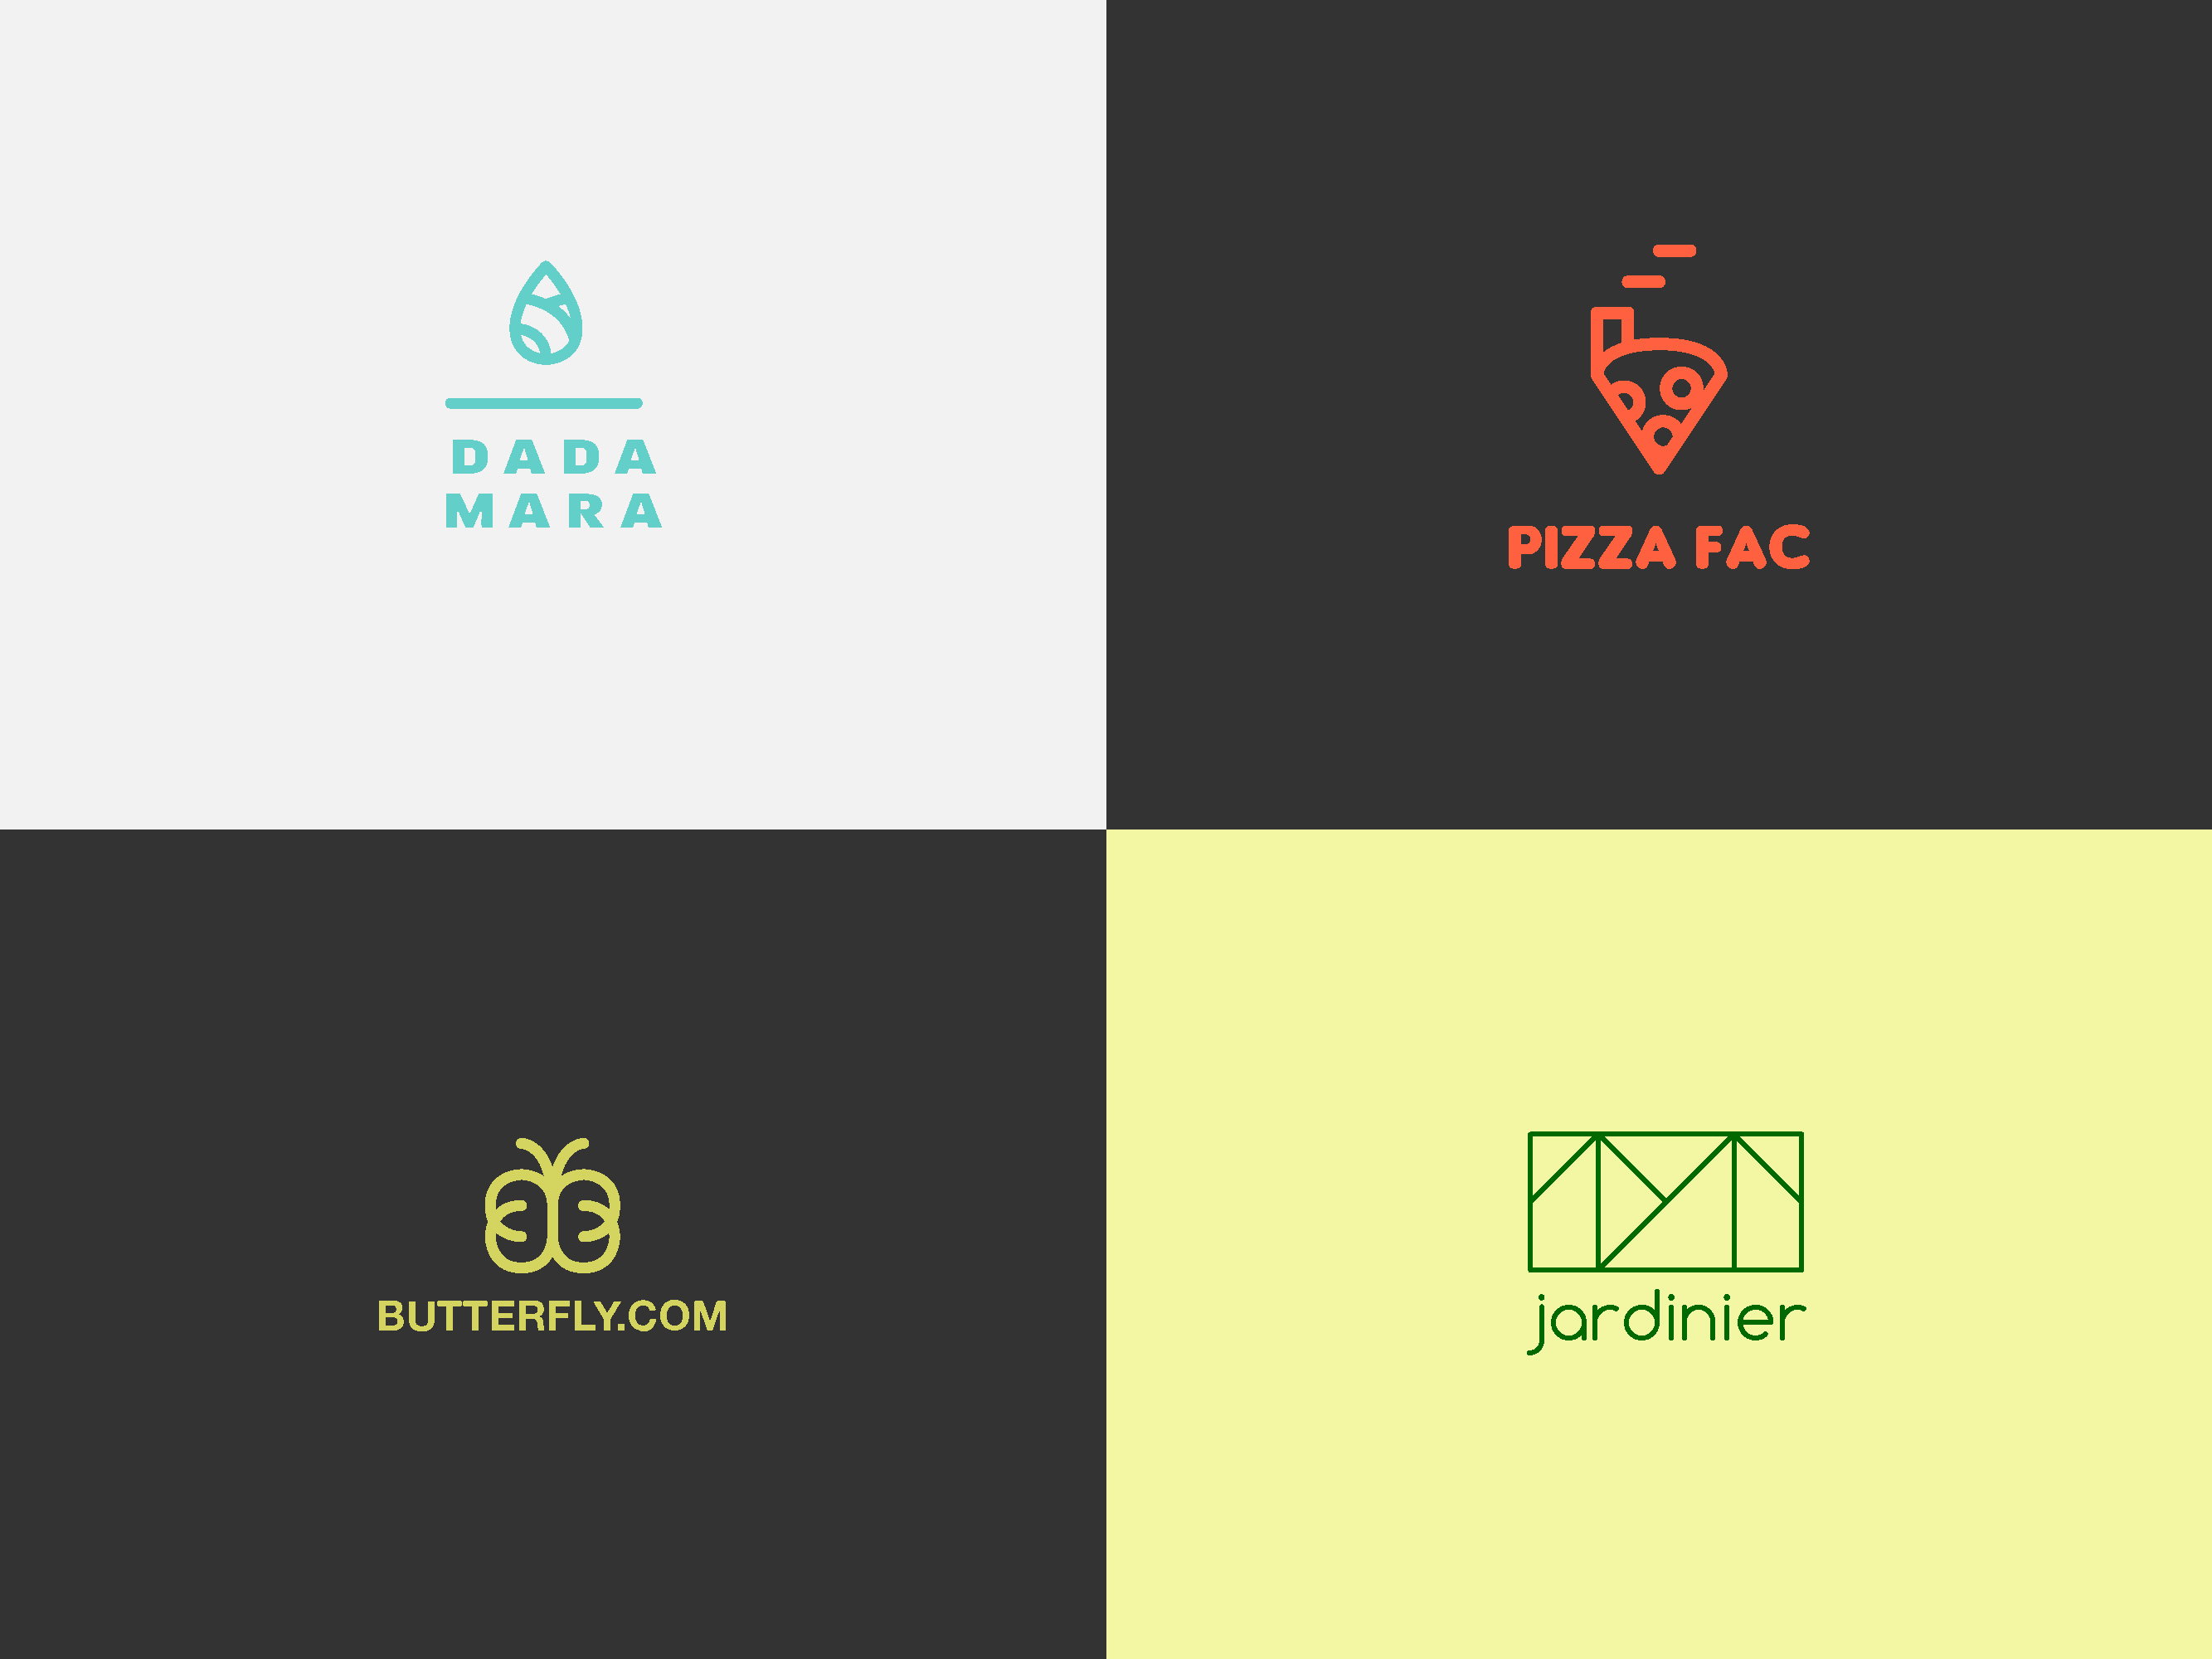 Super SIMPLE IS LIFE SIMPLE LOGO DESIGN for $20 - SEOClerks PM-53